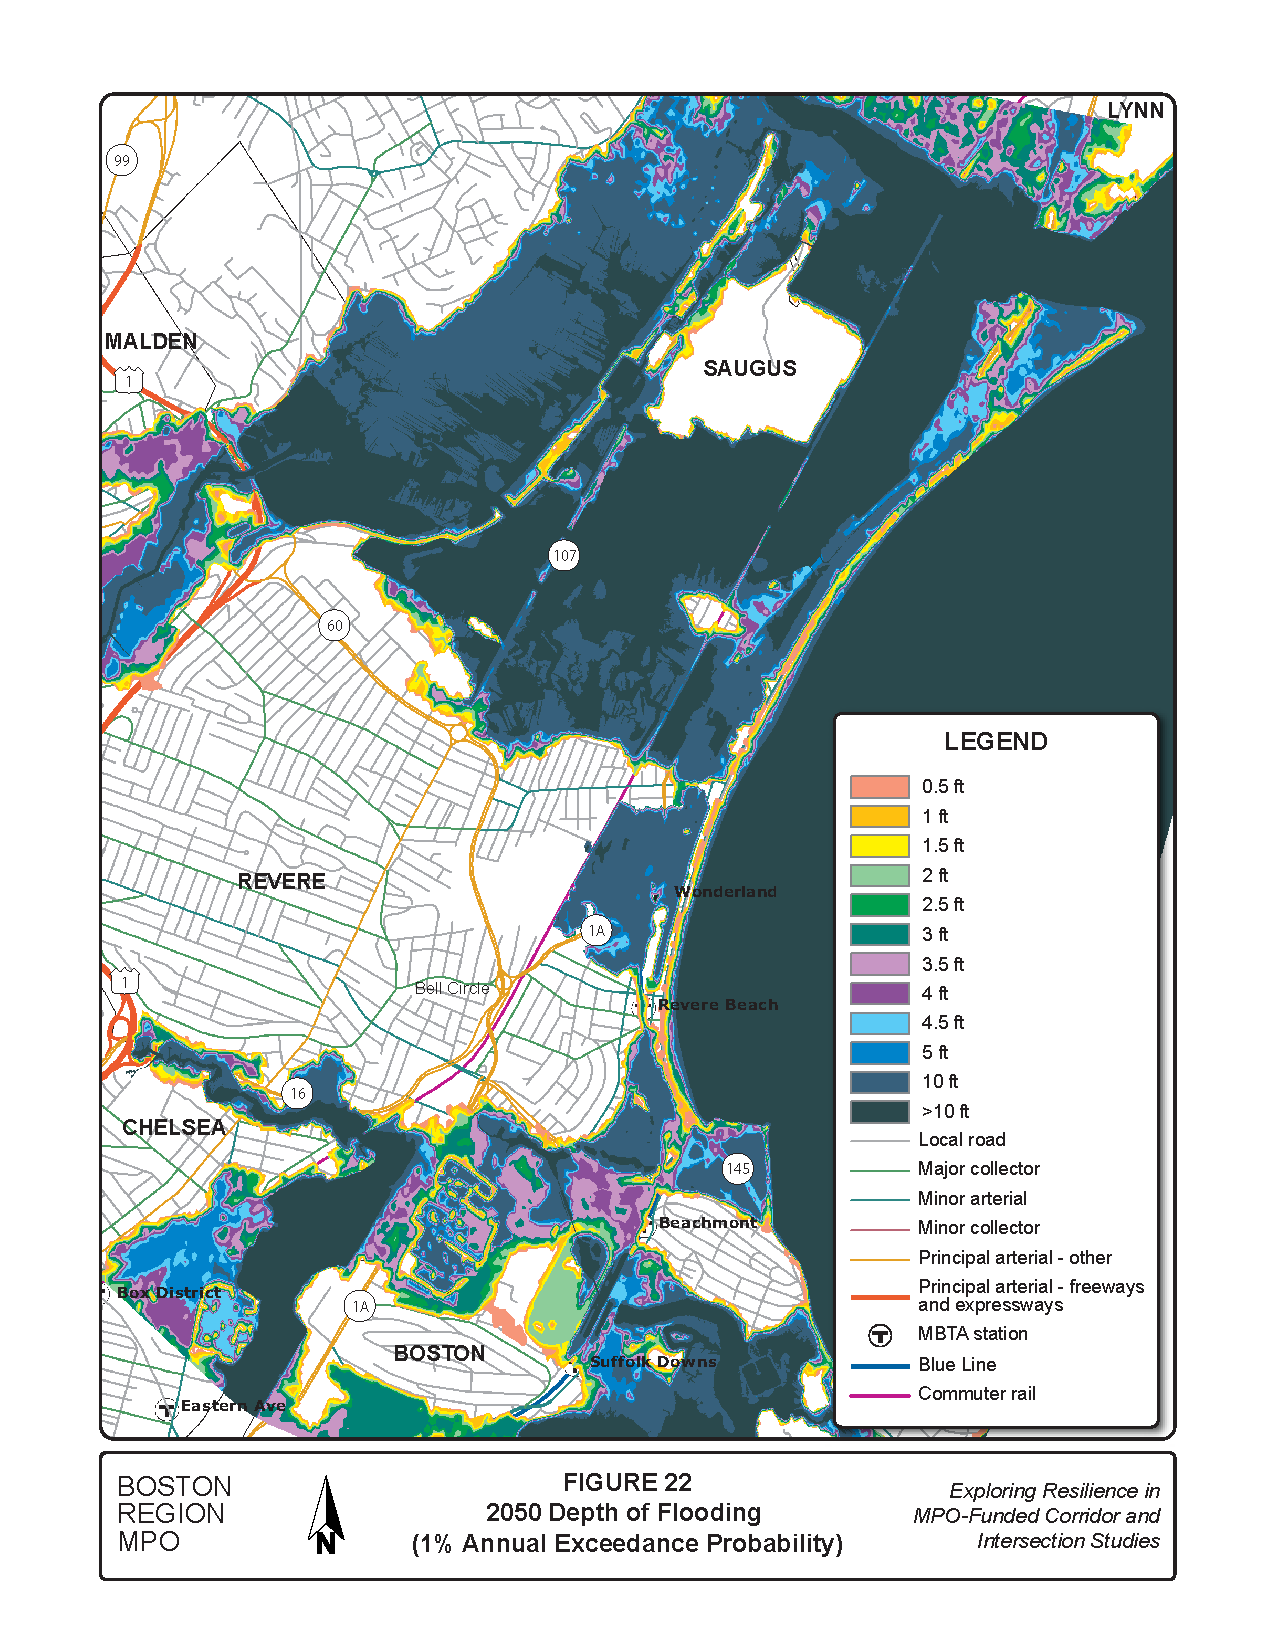 Figure 22 is a map of the study area showing the one percent flood depth for 2050.